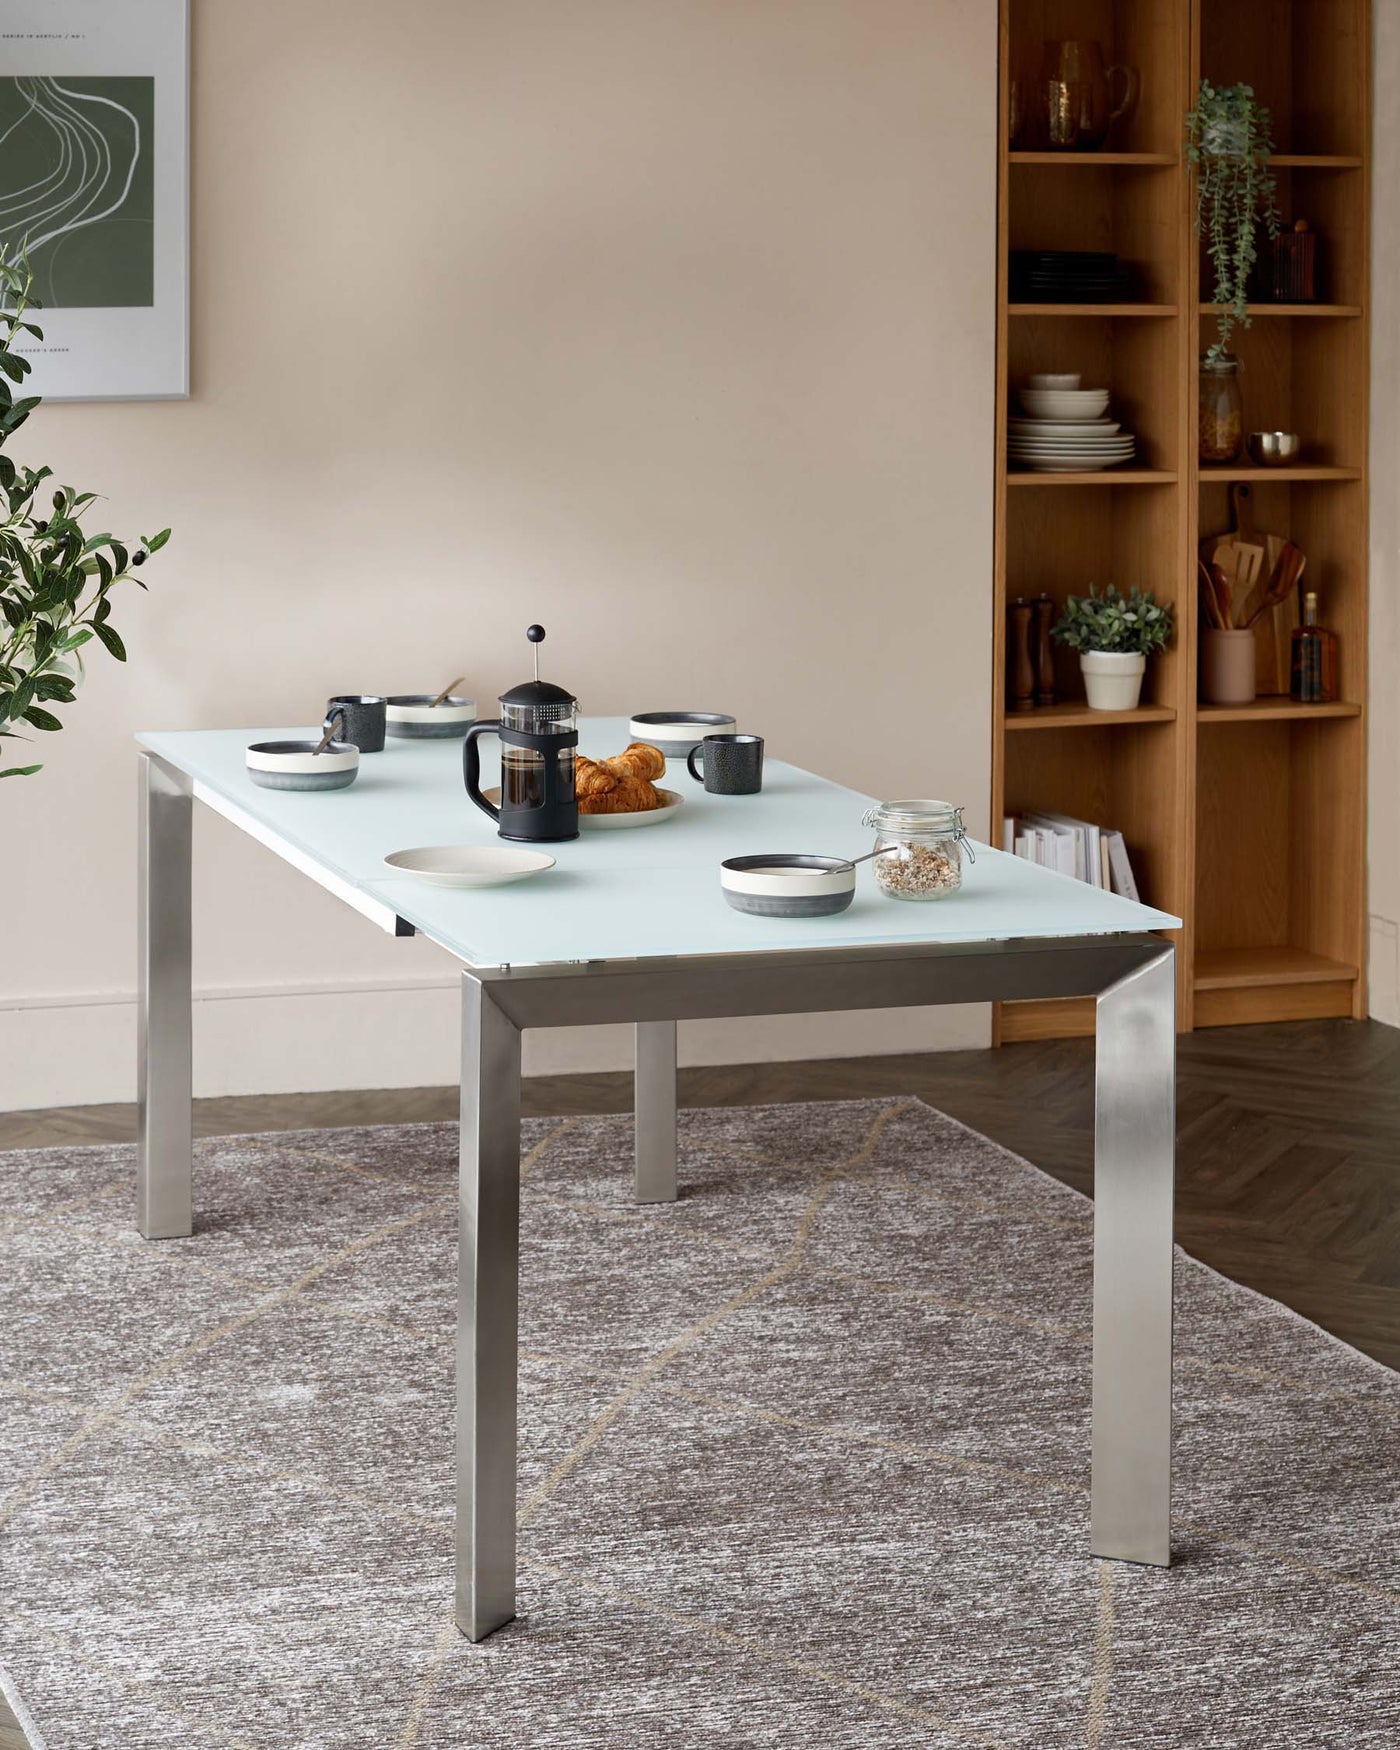 Modern minimalist dining table with a light grey tabletop and square stainless steel legs, accompanied by a tall wooden shelving unit with various decorative items and kitchenware.